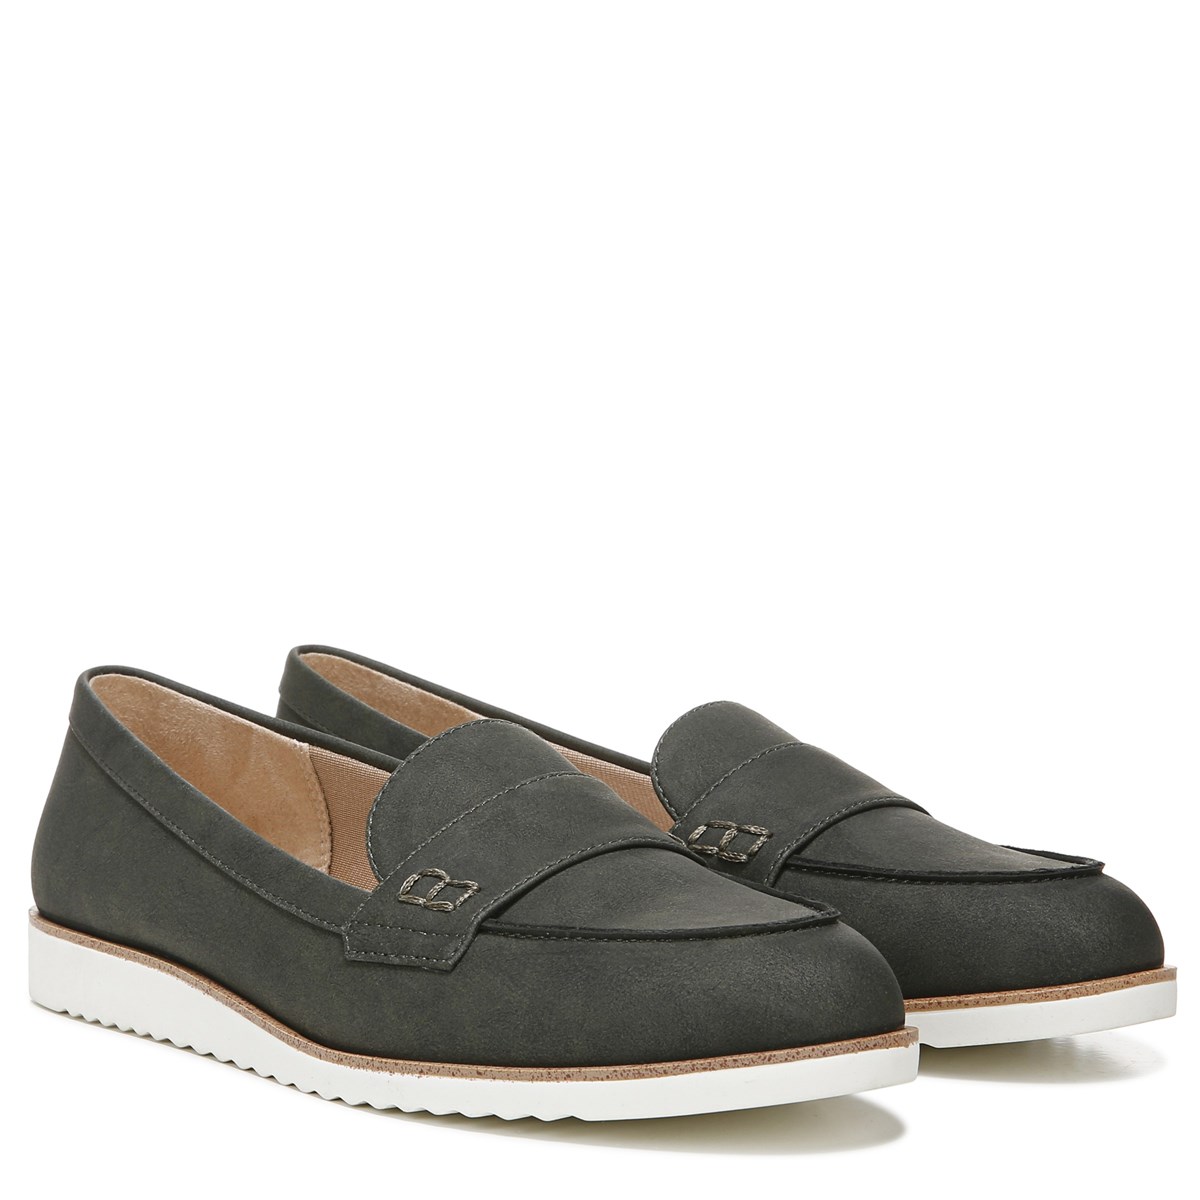 Zee Loafer - Pair